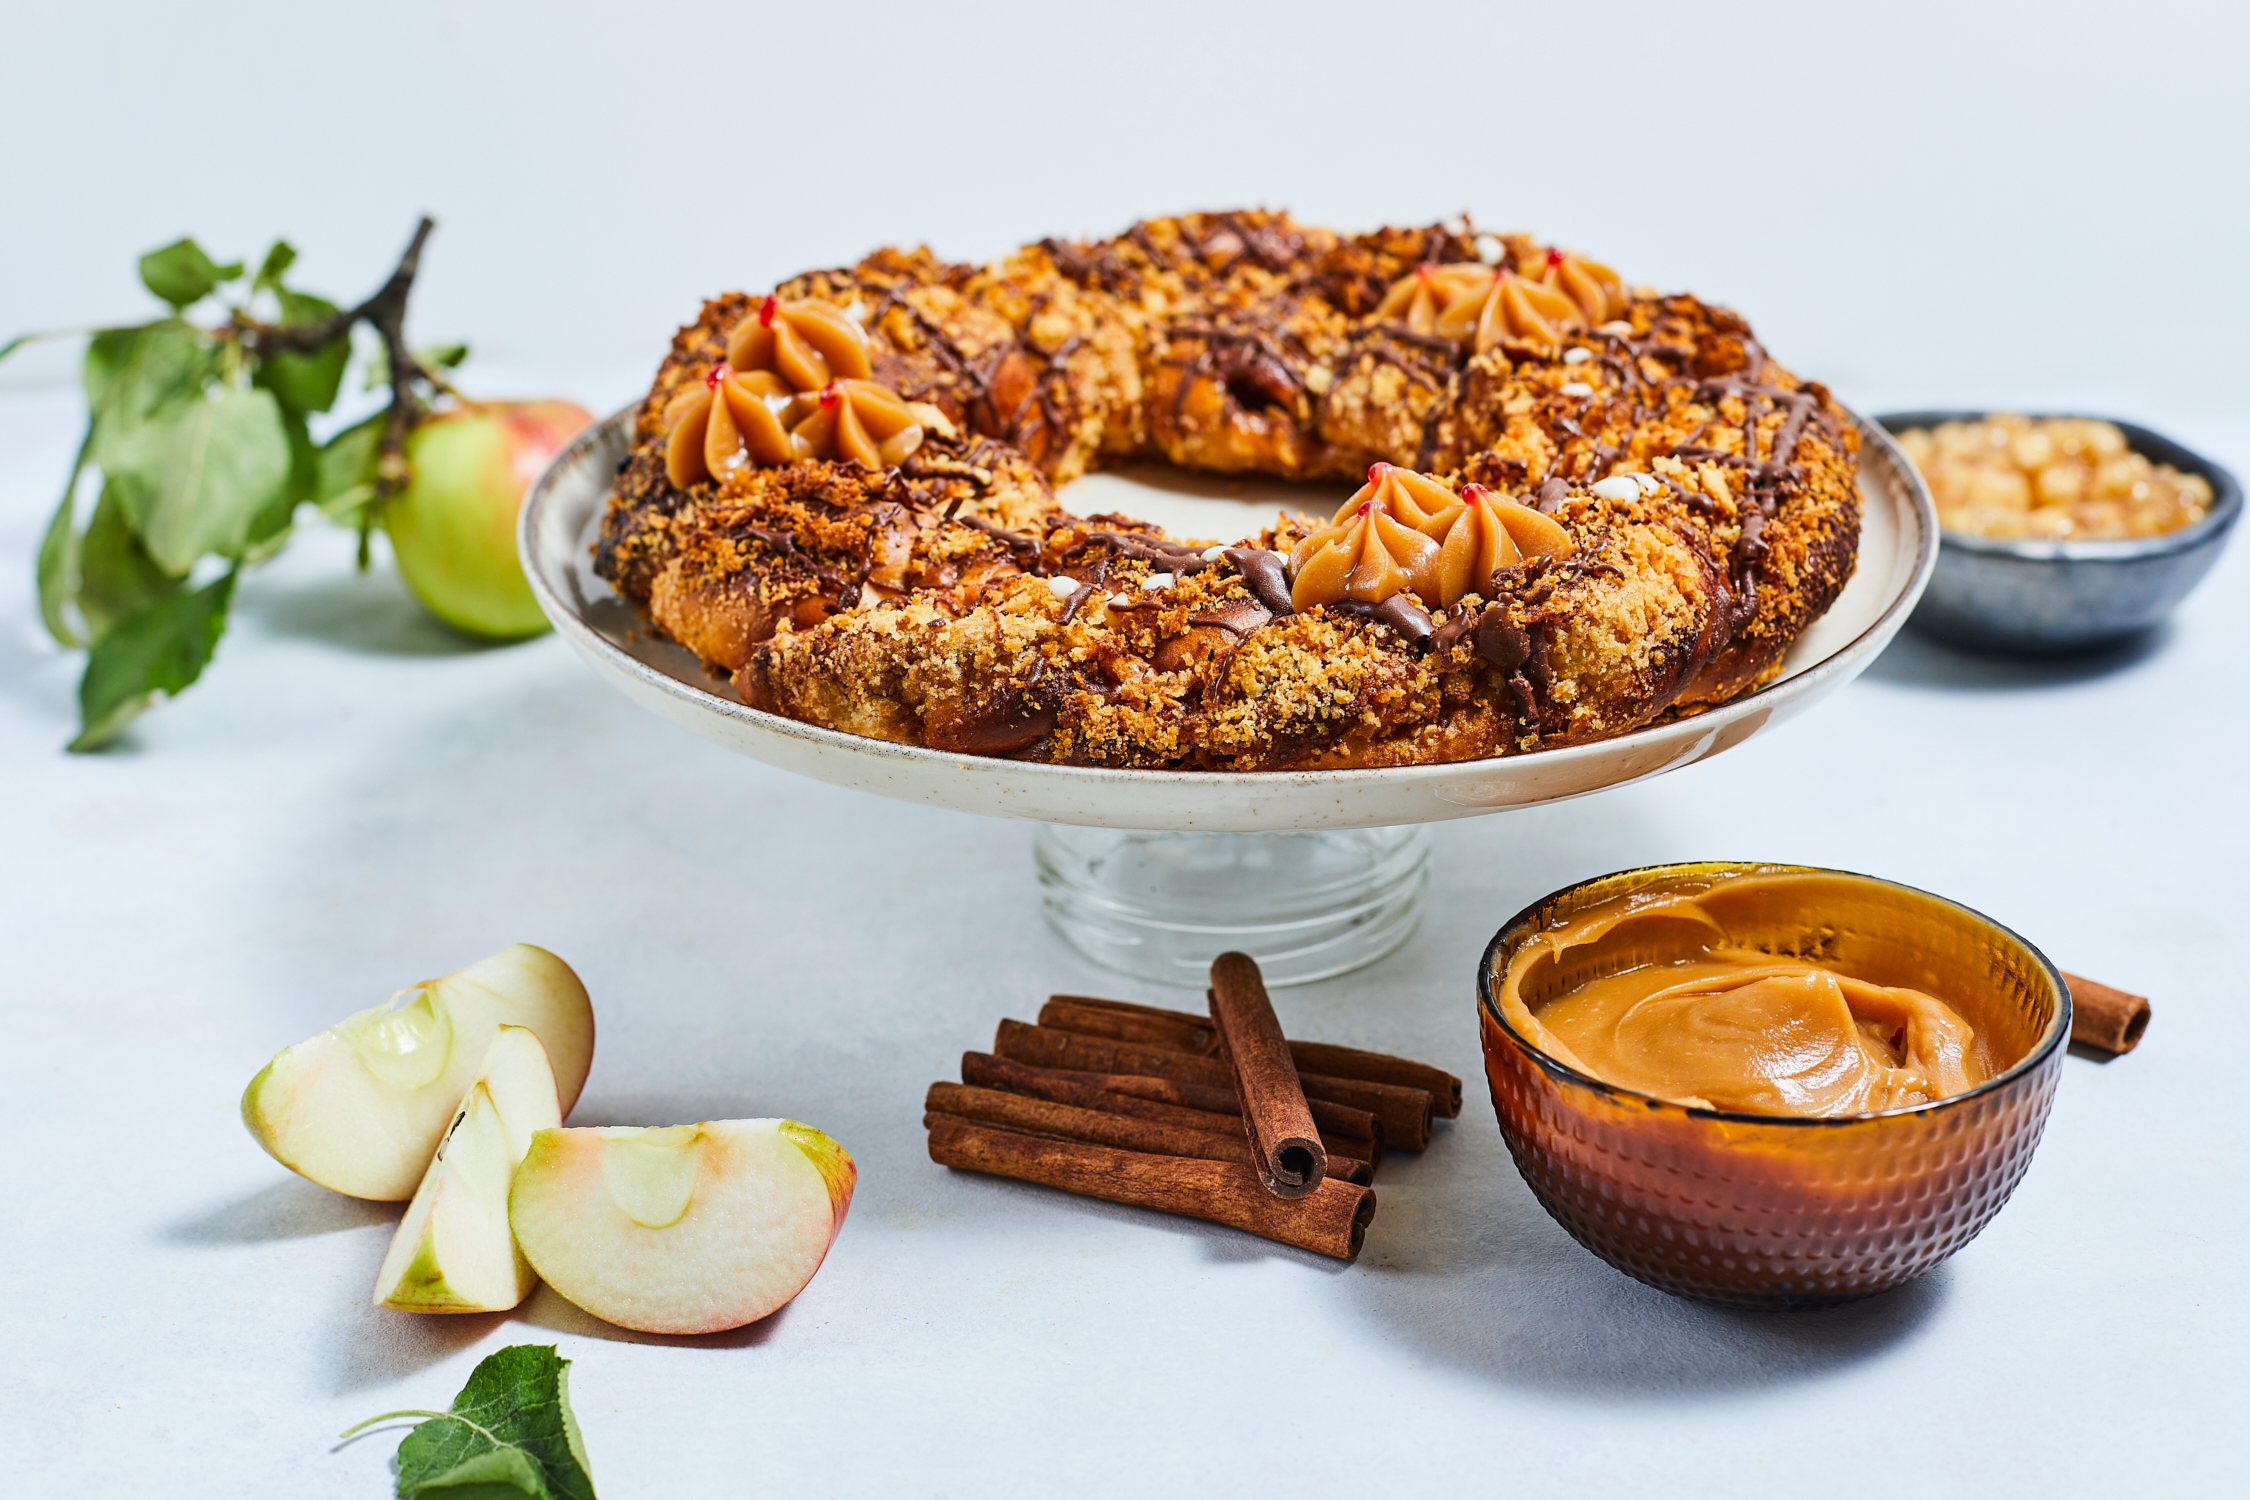 Pretzel with apples and caramel